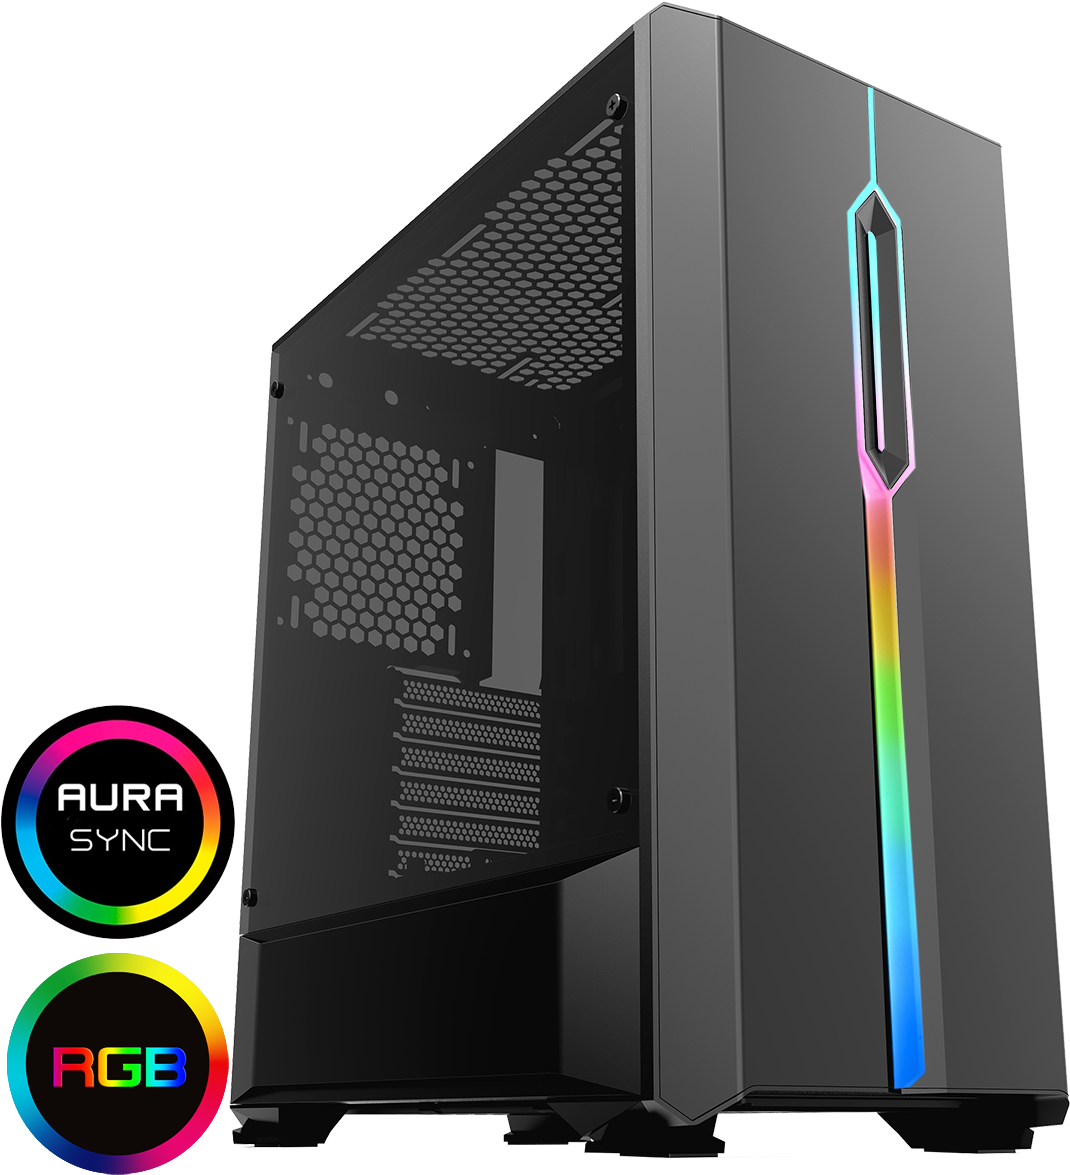 A Black Computer Tower With Rainbow Colored Lights